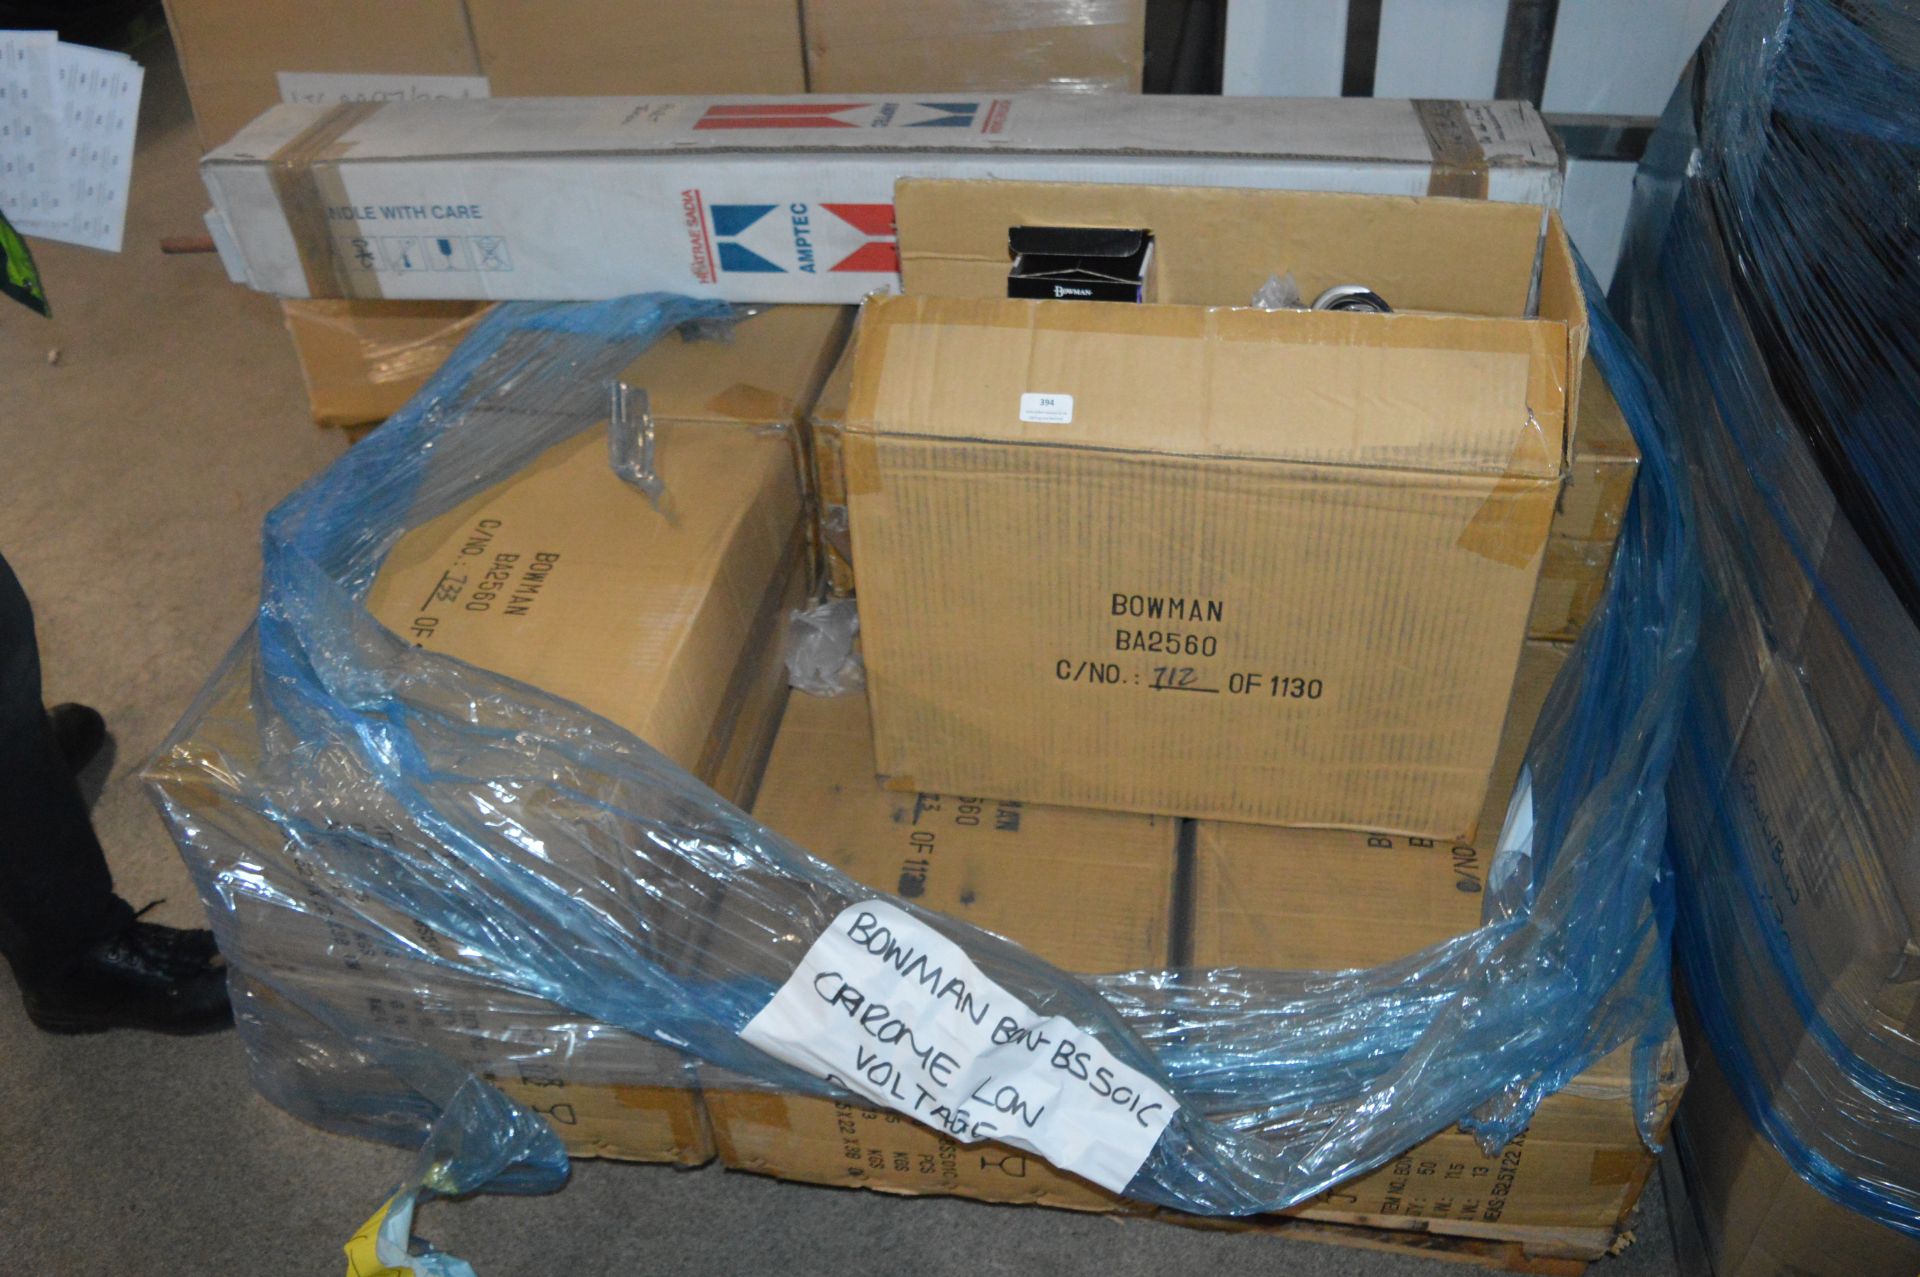 *Pallet of ~545 Bowman Eyeball Downlights, plus an - Image 2 of 2